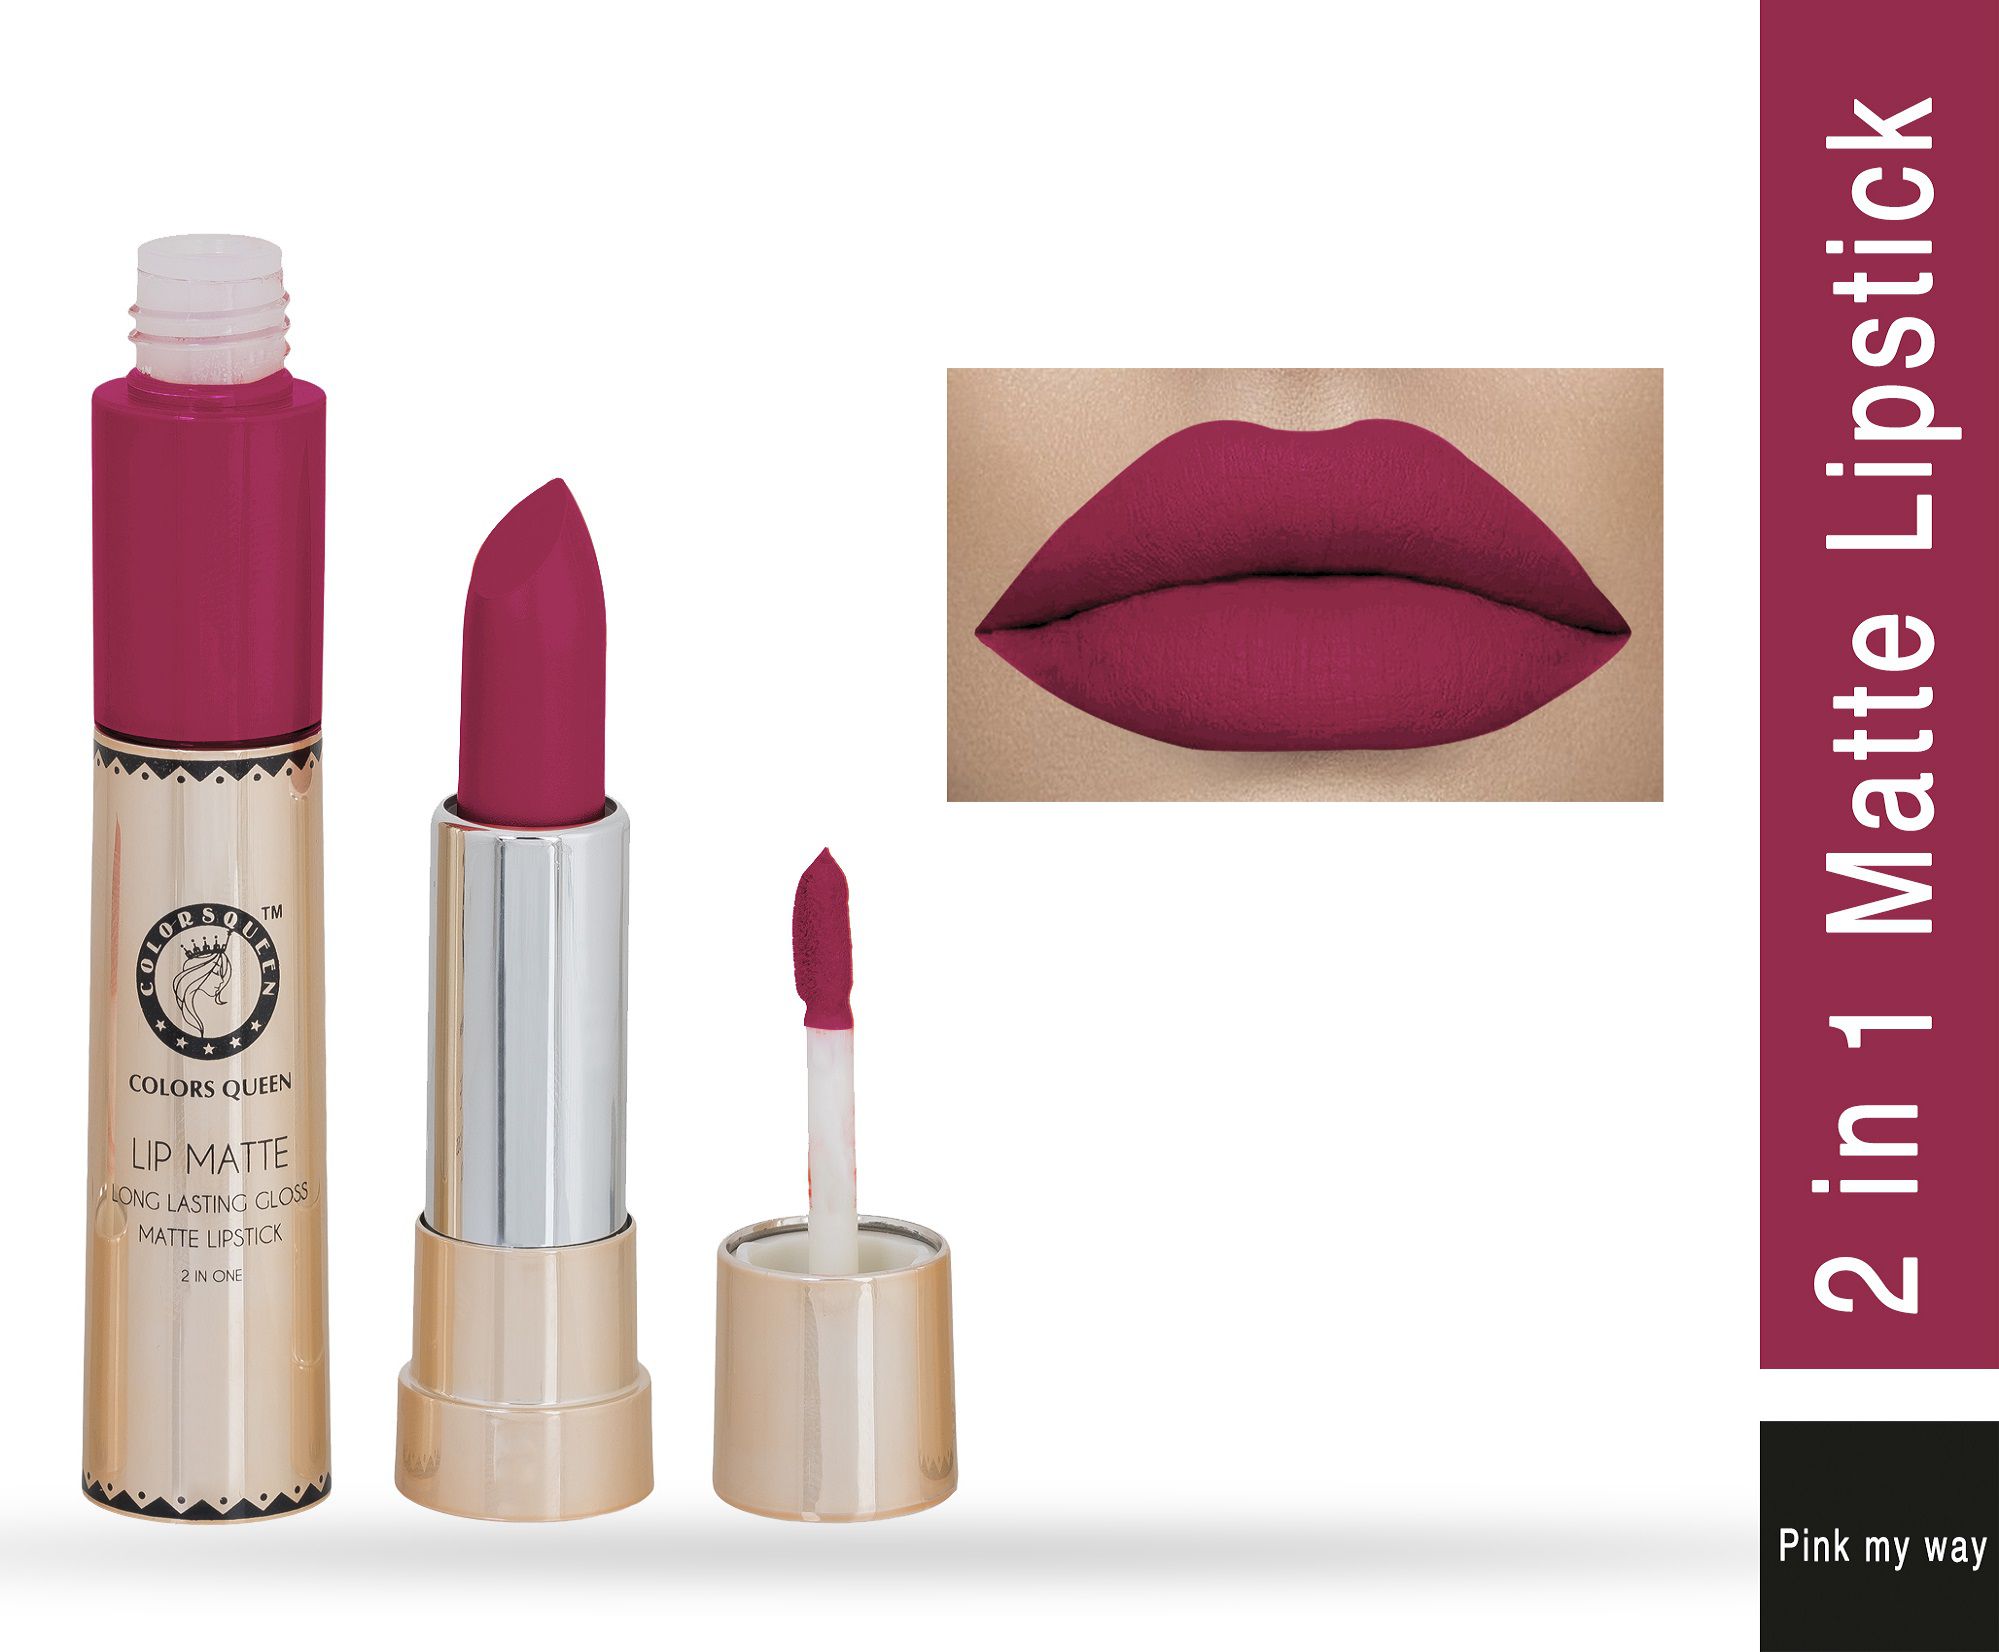     			Colors Queen 2 in 1 Lipstick Pink My Way Shade - 25 | SPF 15 8 g